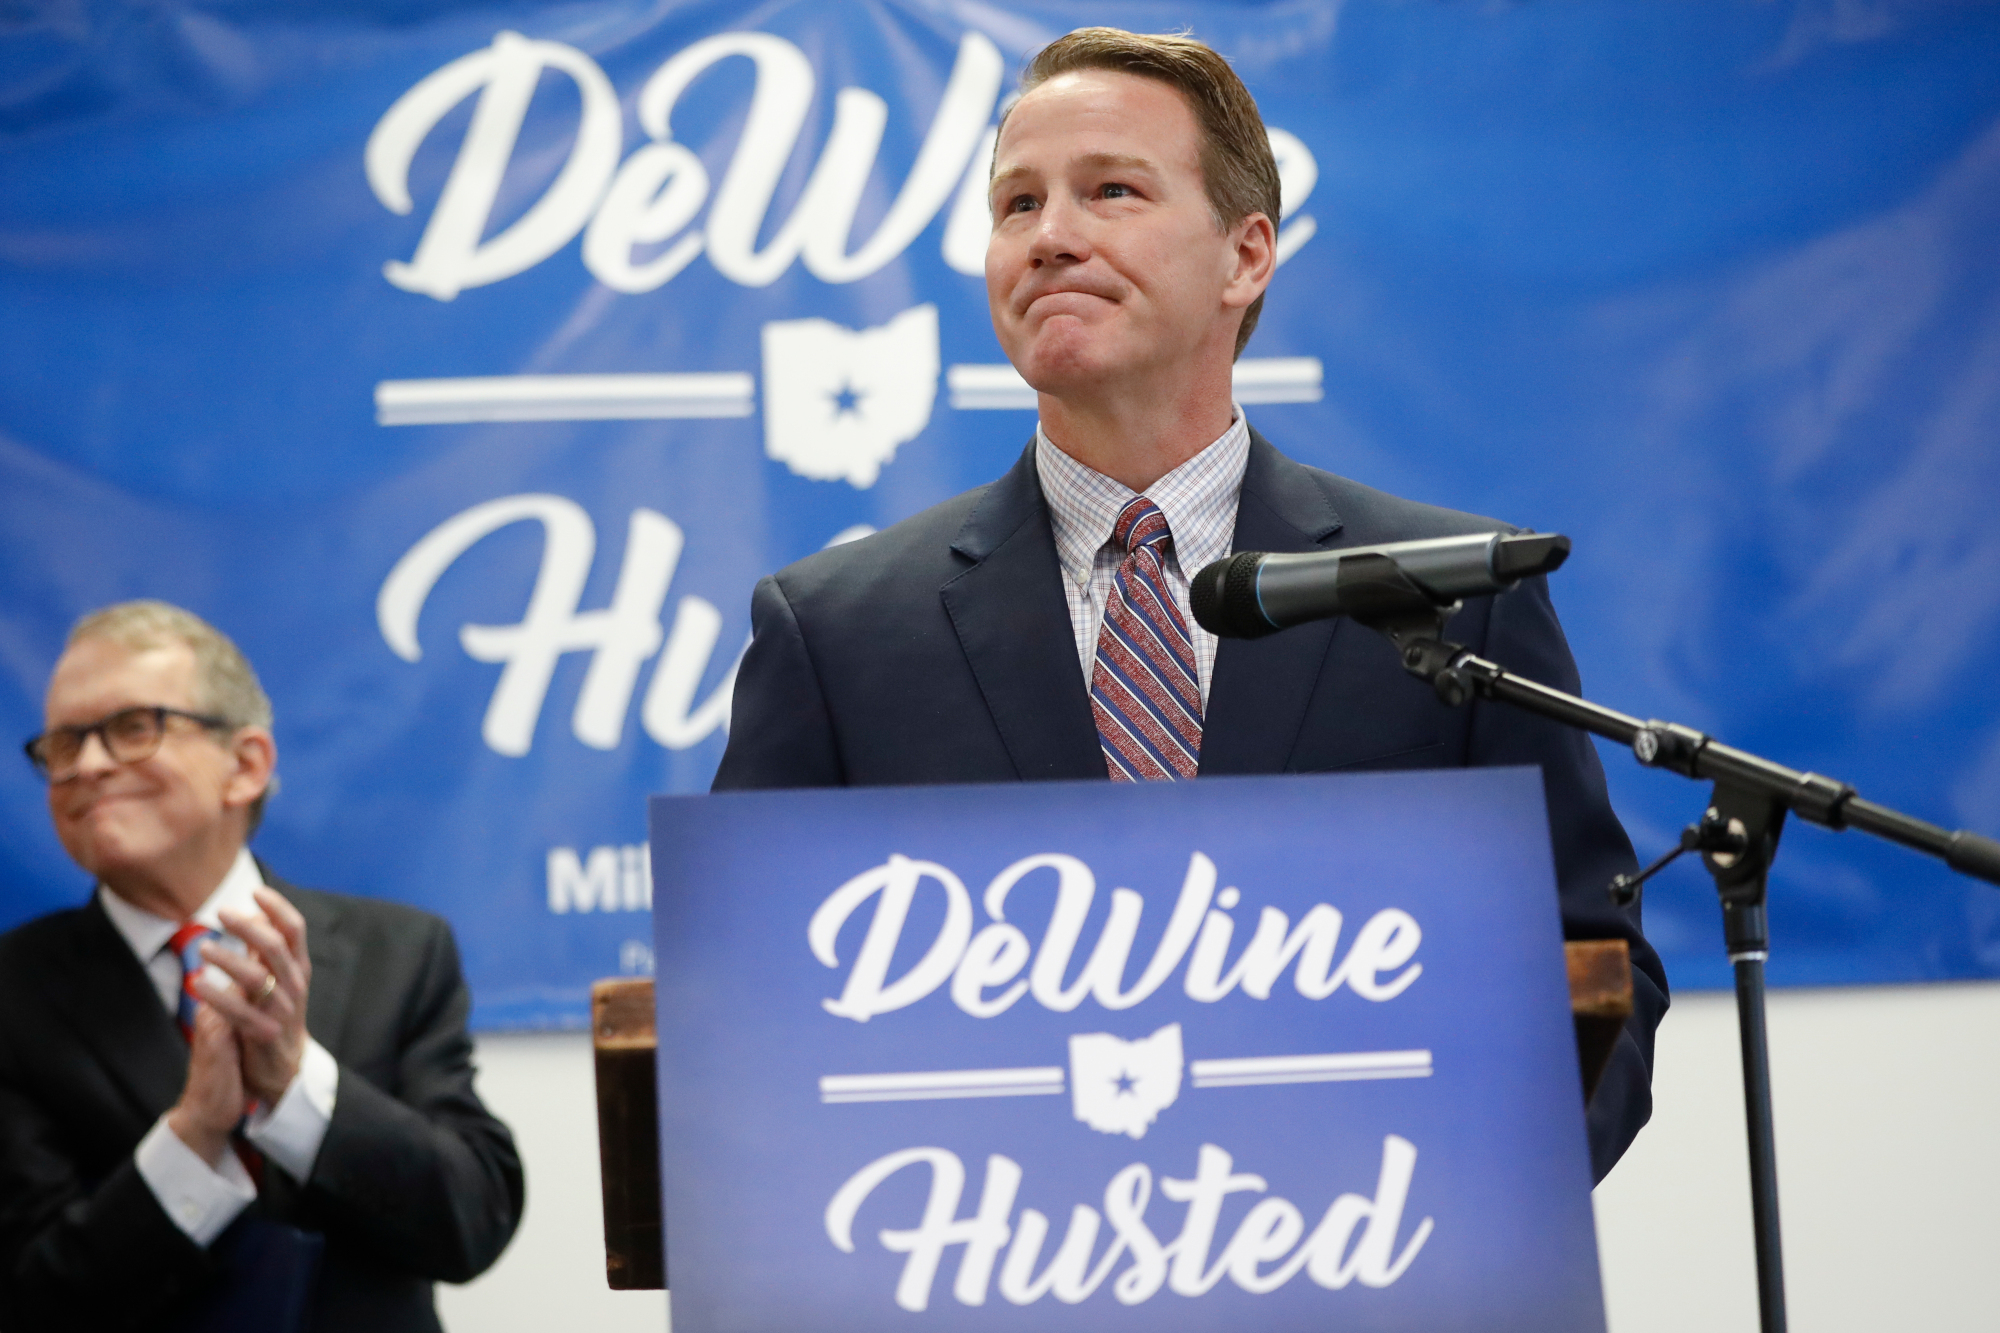 FirstEnergy gave $1 million to boost Ohio Lt. Gov. Jon Husted’s campaign before scandal, document shows